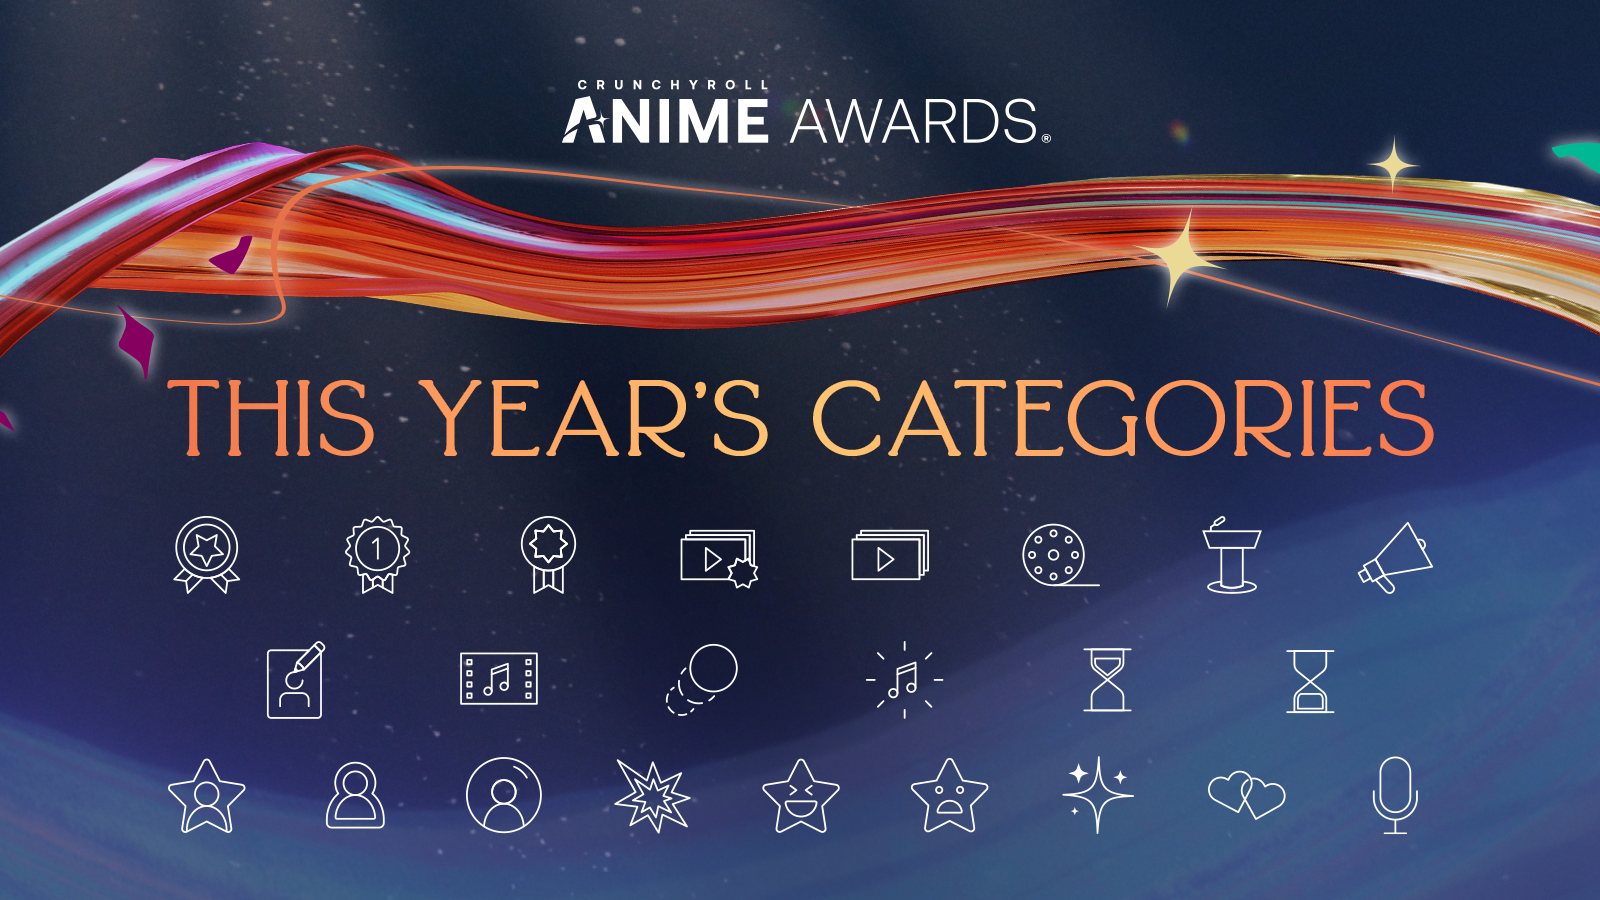 Crunchyroll Anime Awards 2020 Winners Announced | AFA: Animation For Adults  : Animation News, Reviews, Articles, Podcasts and More